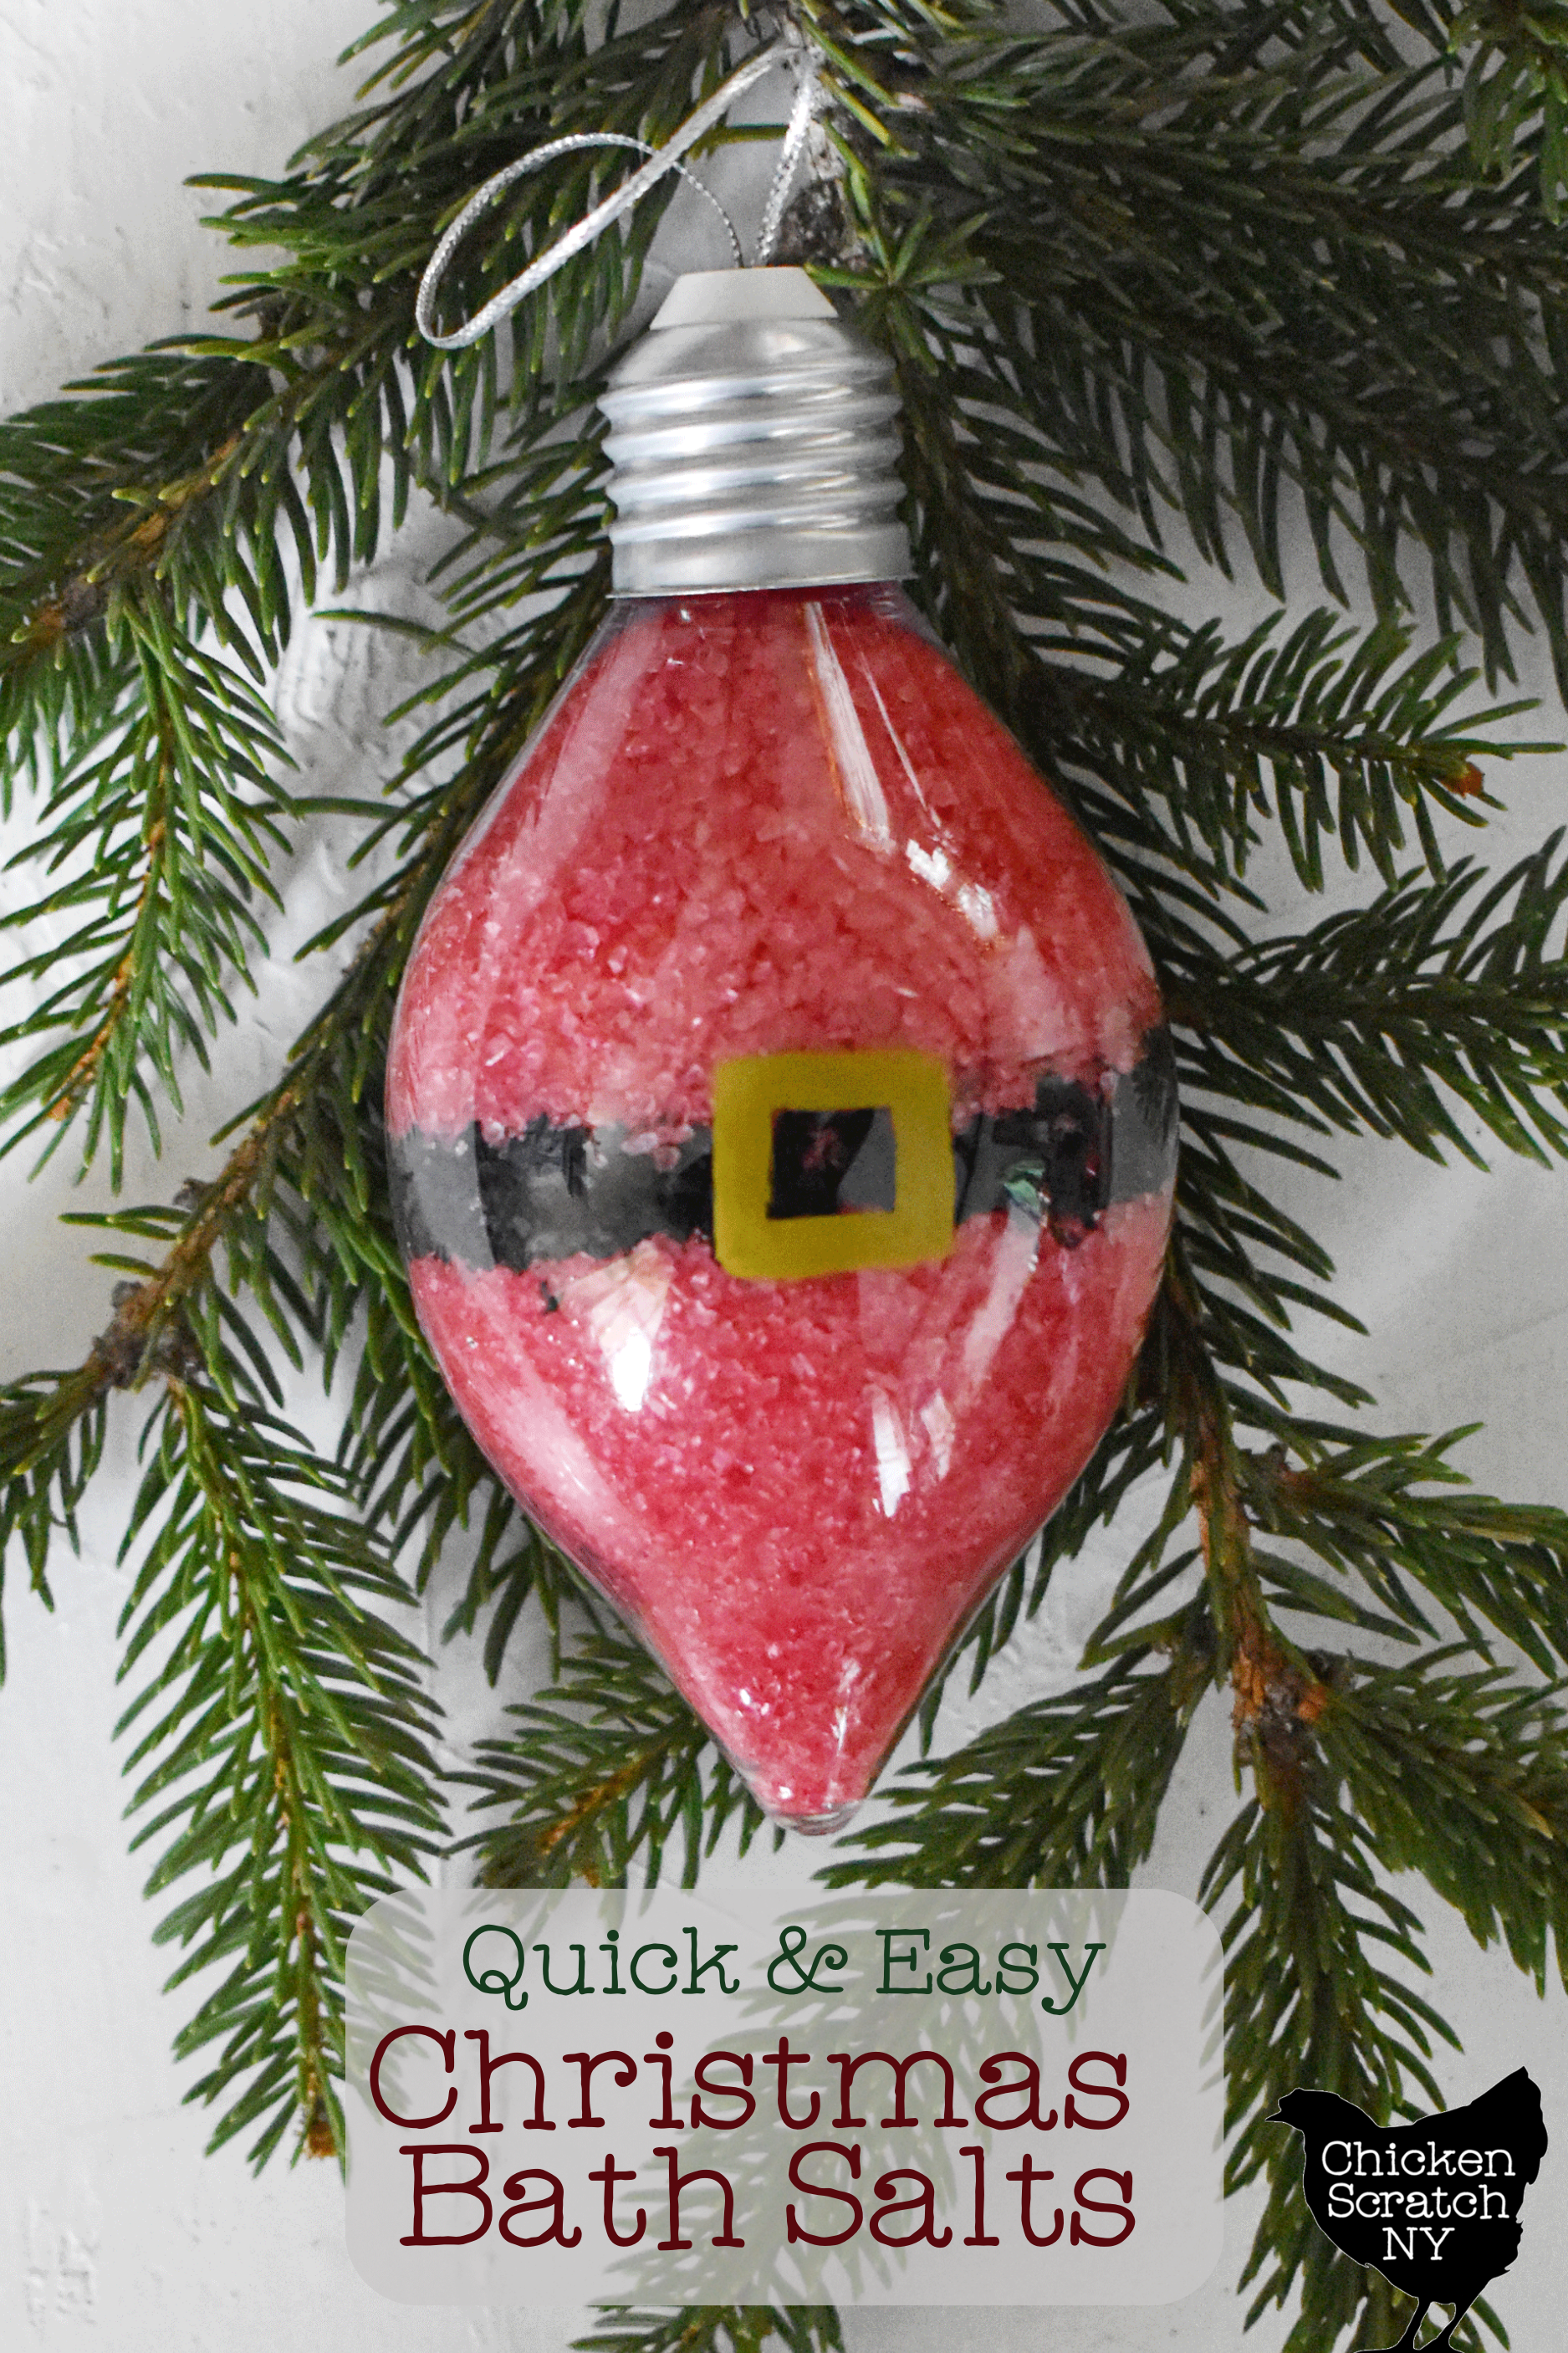 clear plastic ornament filled with red and black bath salts layered to look like Santa